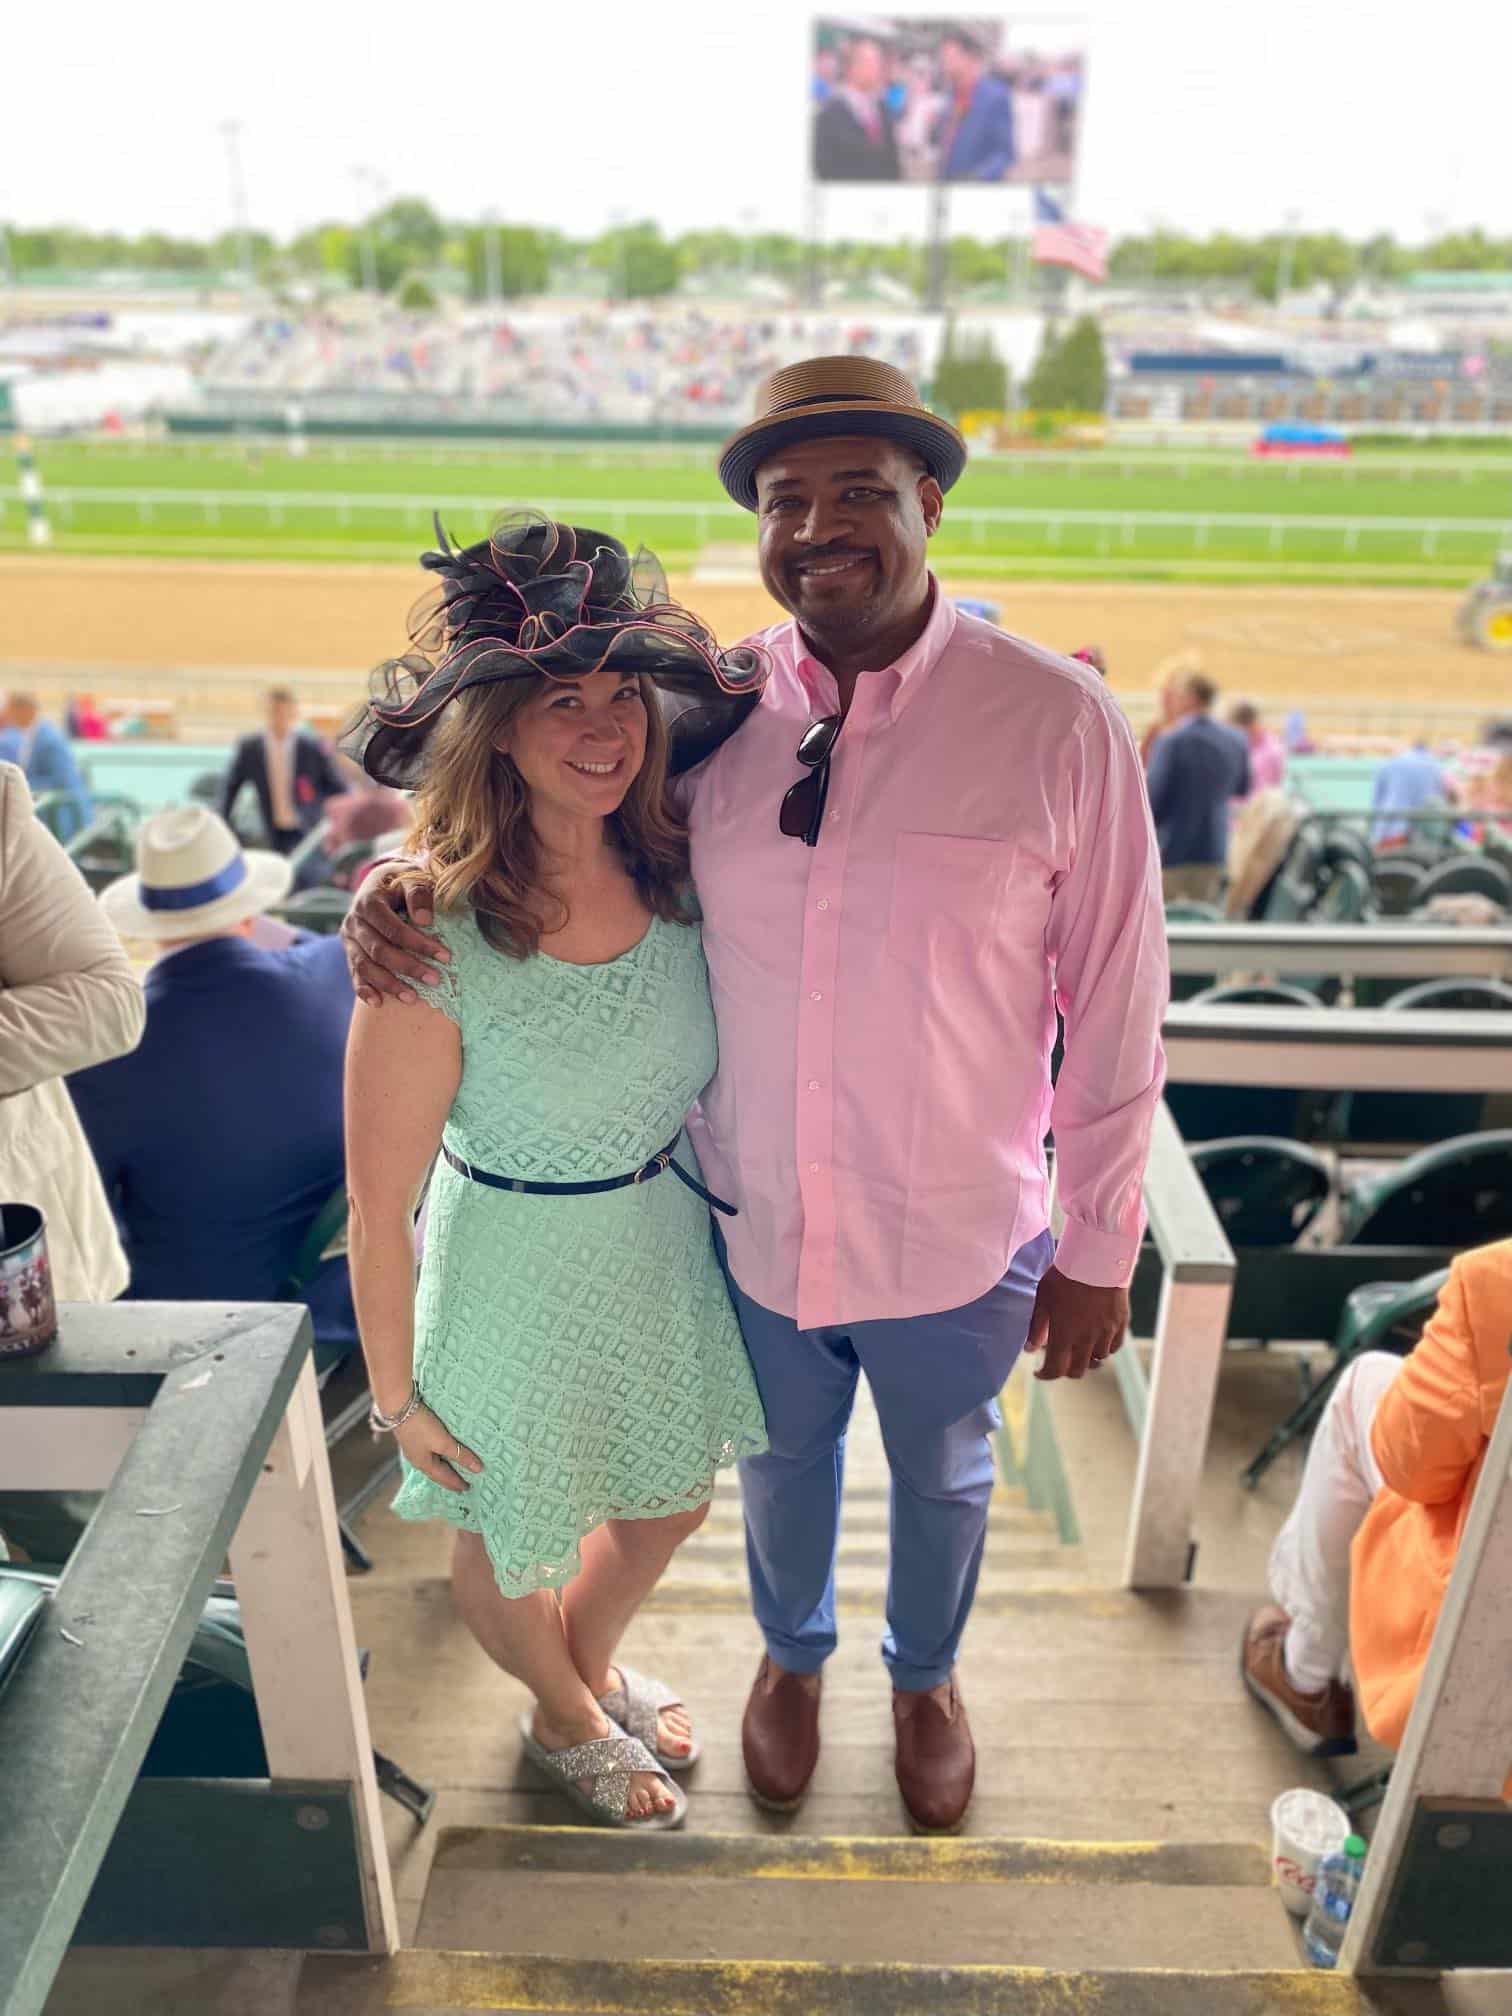 First Call team member, Marques, enjoying the Kentucky Derby with his date.